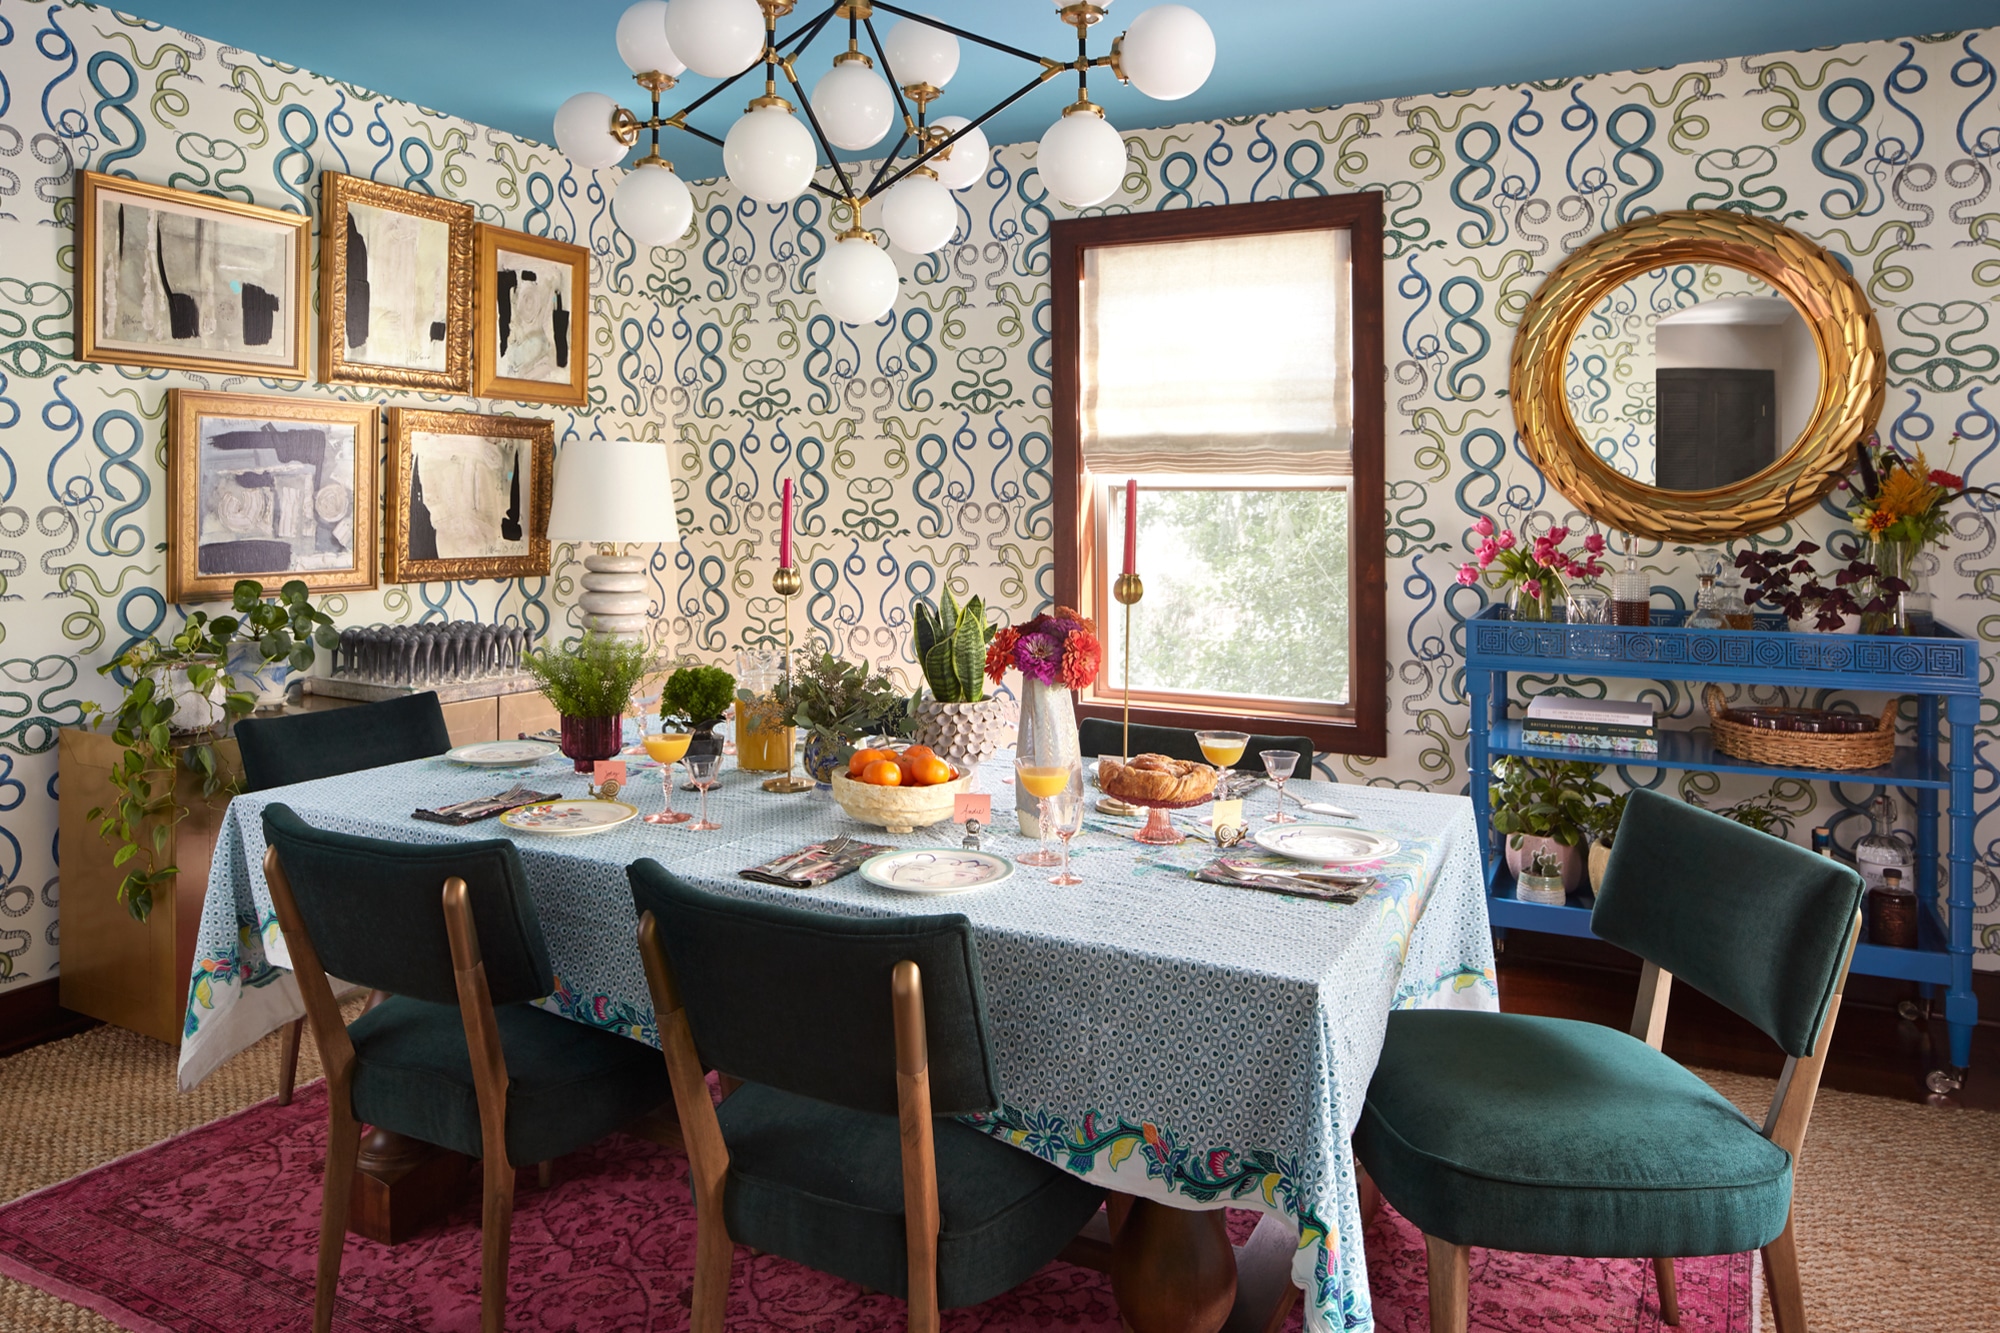 Bryn Mawr Dining Room Wallpaper Eclectic by Michelle Gage Interiors